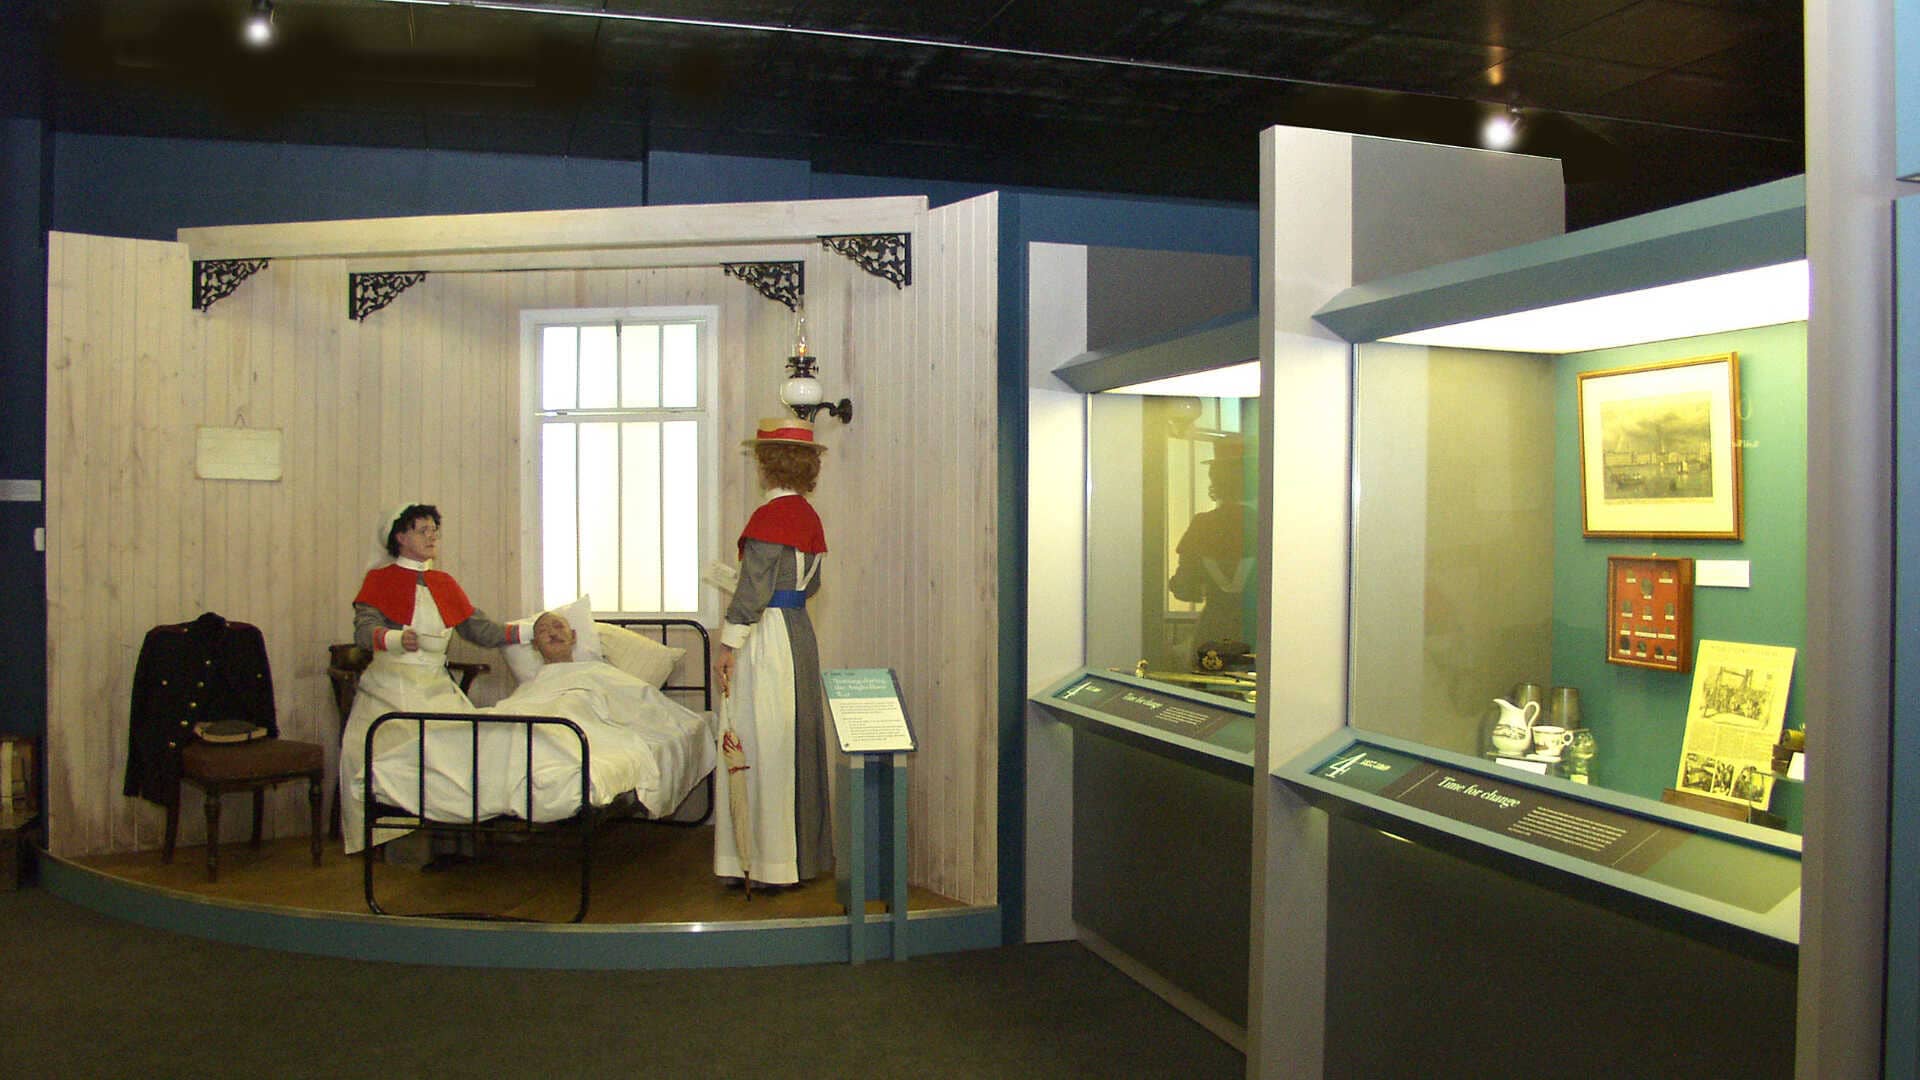 mannequins dressed as nurses next to a display cabinet